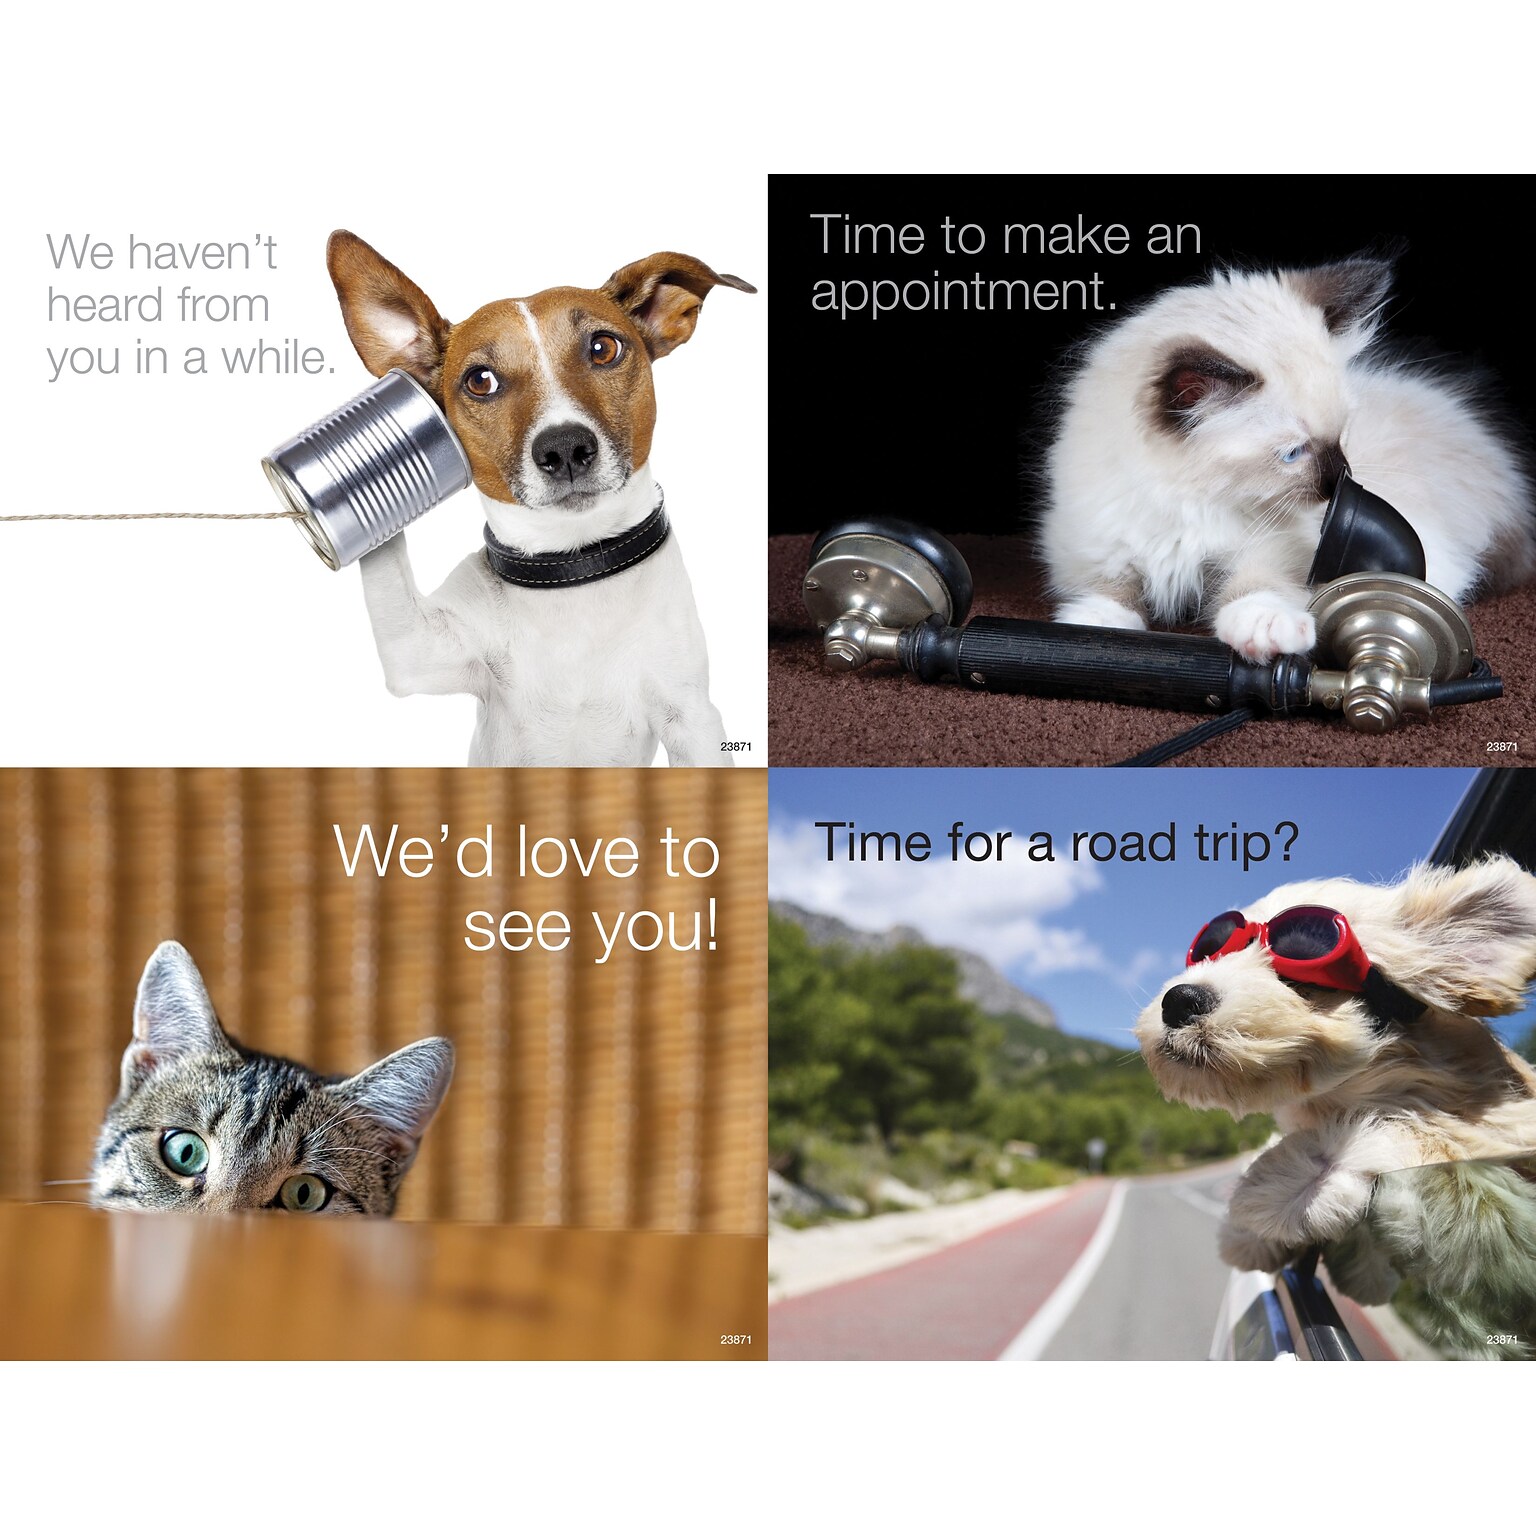 Medical Arts Press® Photo Image Assorted Postcards; for Laser Printer; Dogs and Cats, 100/Pk